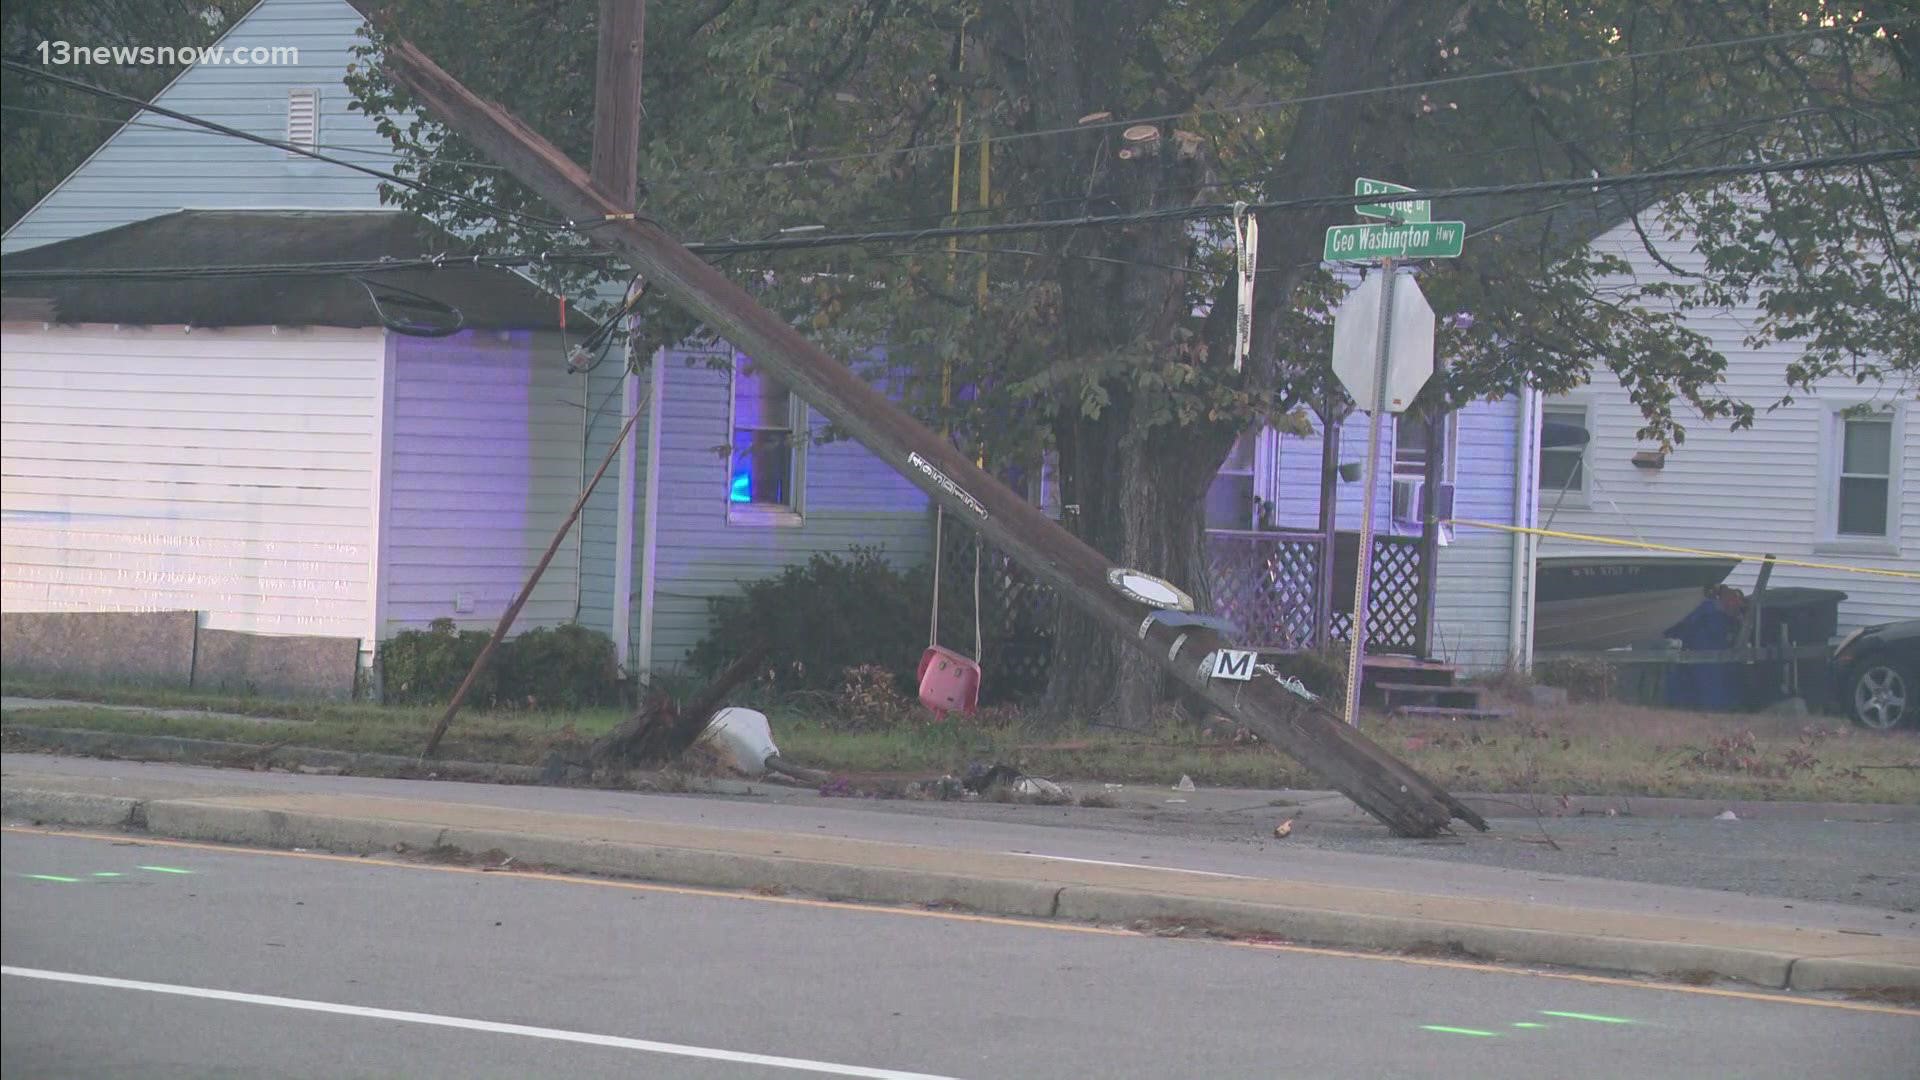 A power pole was knocked down during a crash that happened near 4900 George Washington Highway.